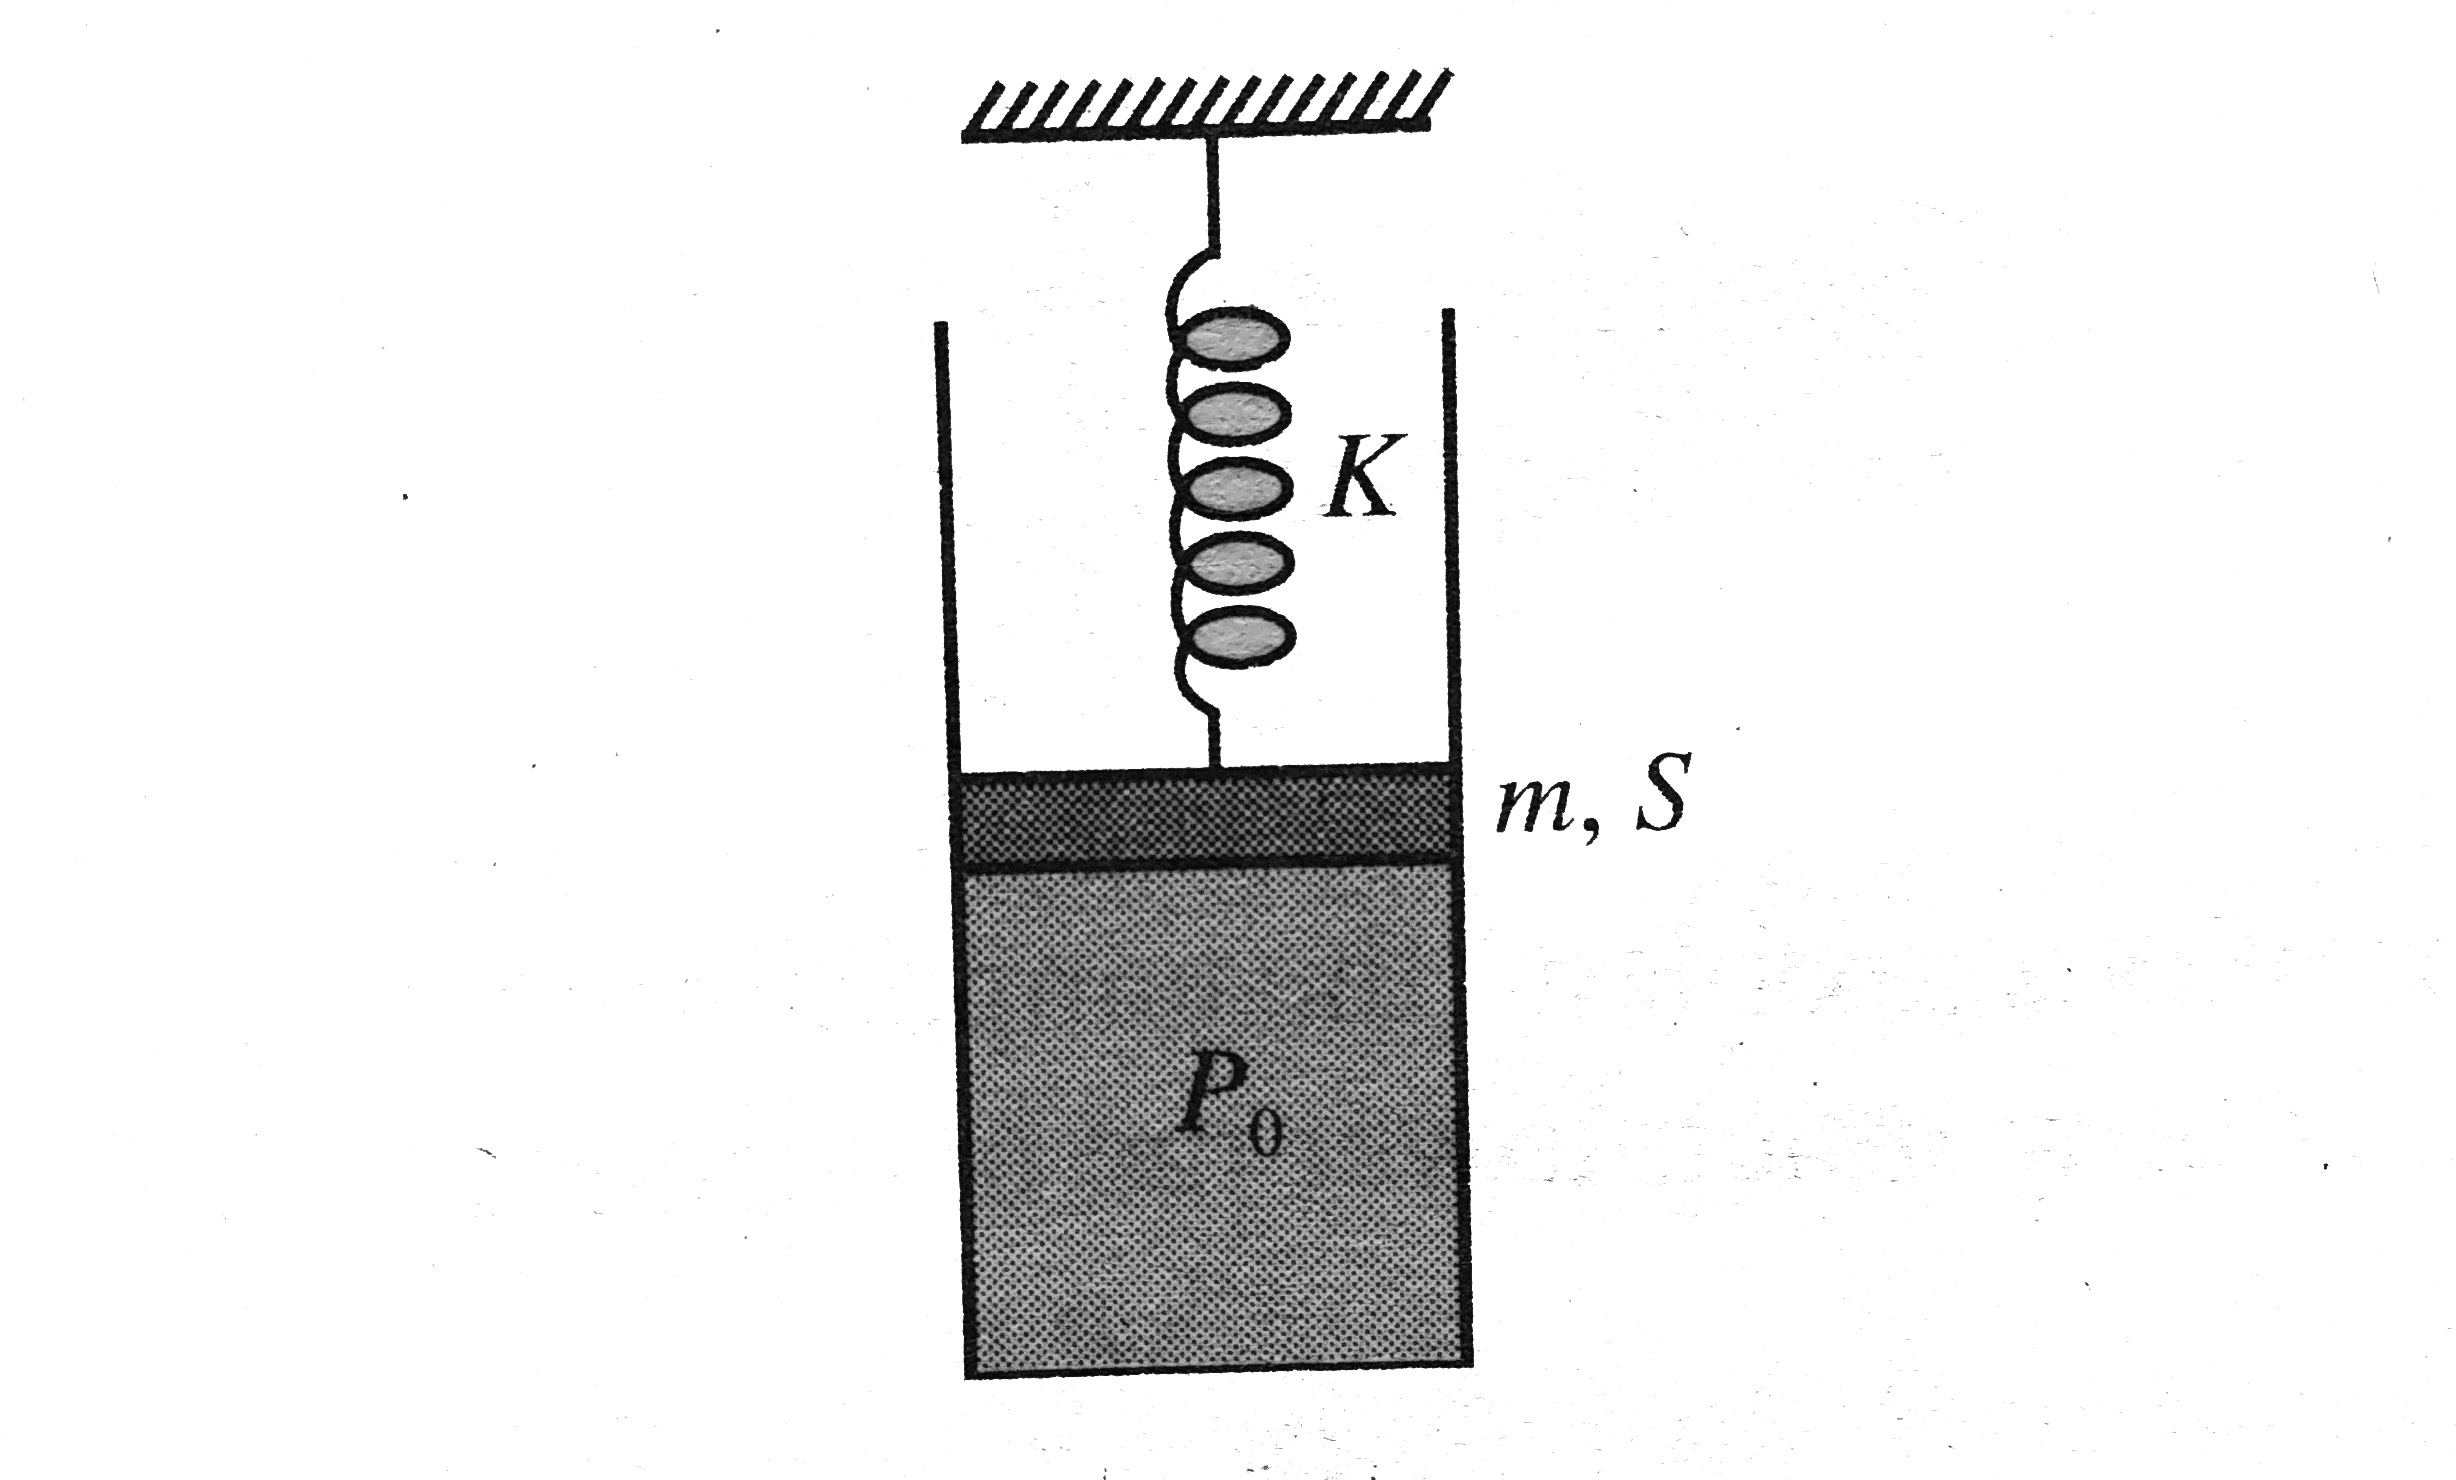 Choose the correct option:  
In the arrangement shown in Fig. gas is thermally insulated. An ideal gas is filled in the cylinder having pressure P(0) (gt atmospheric pressure P(a)). The spring of force constant K is initially un-stretched. The piston of mass m and area S is frictionless. In equilibrium, the piston rises up by distance x(0), then